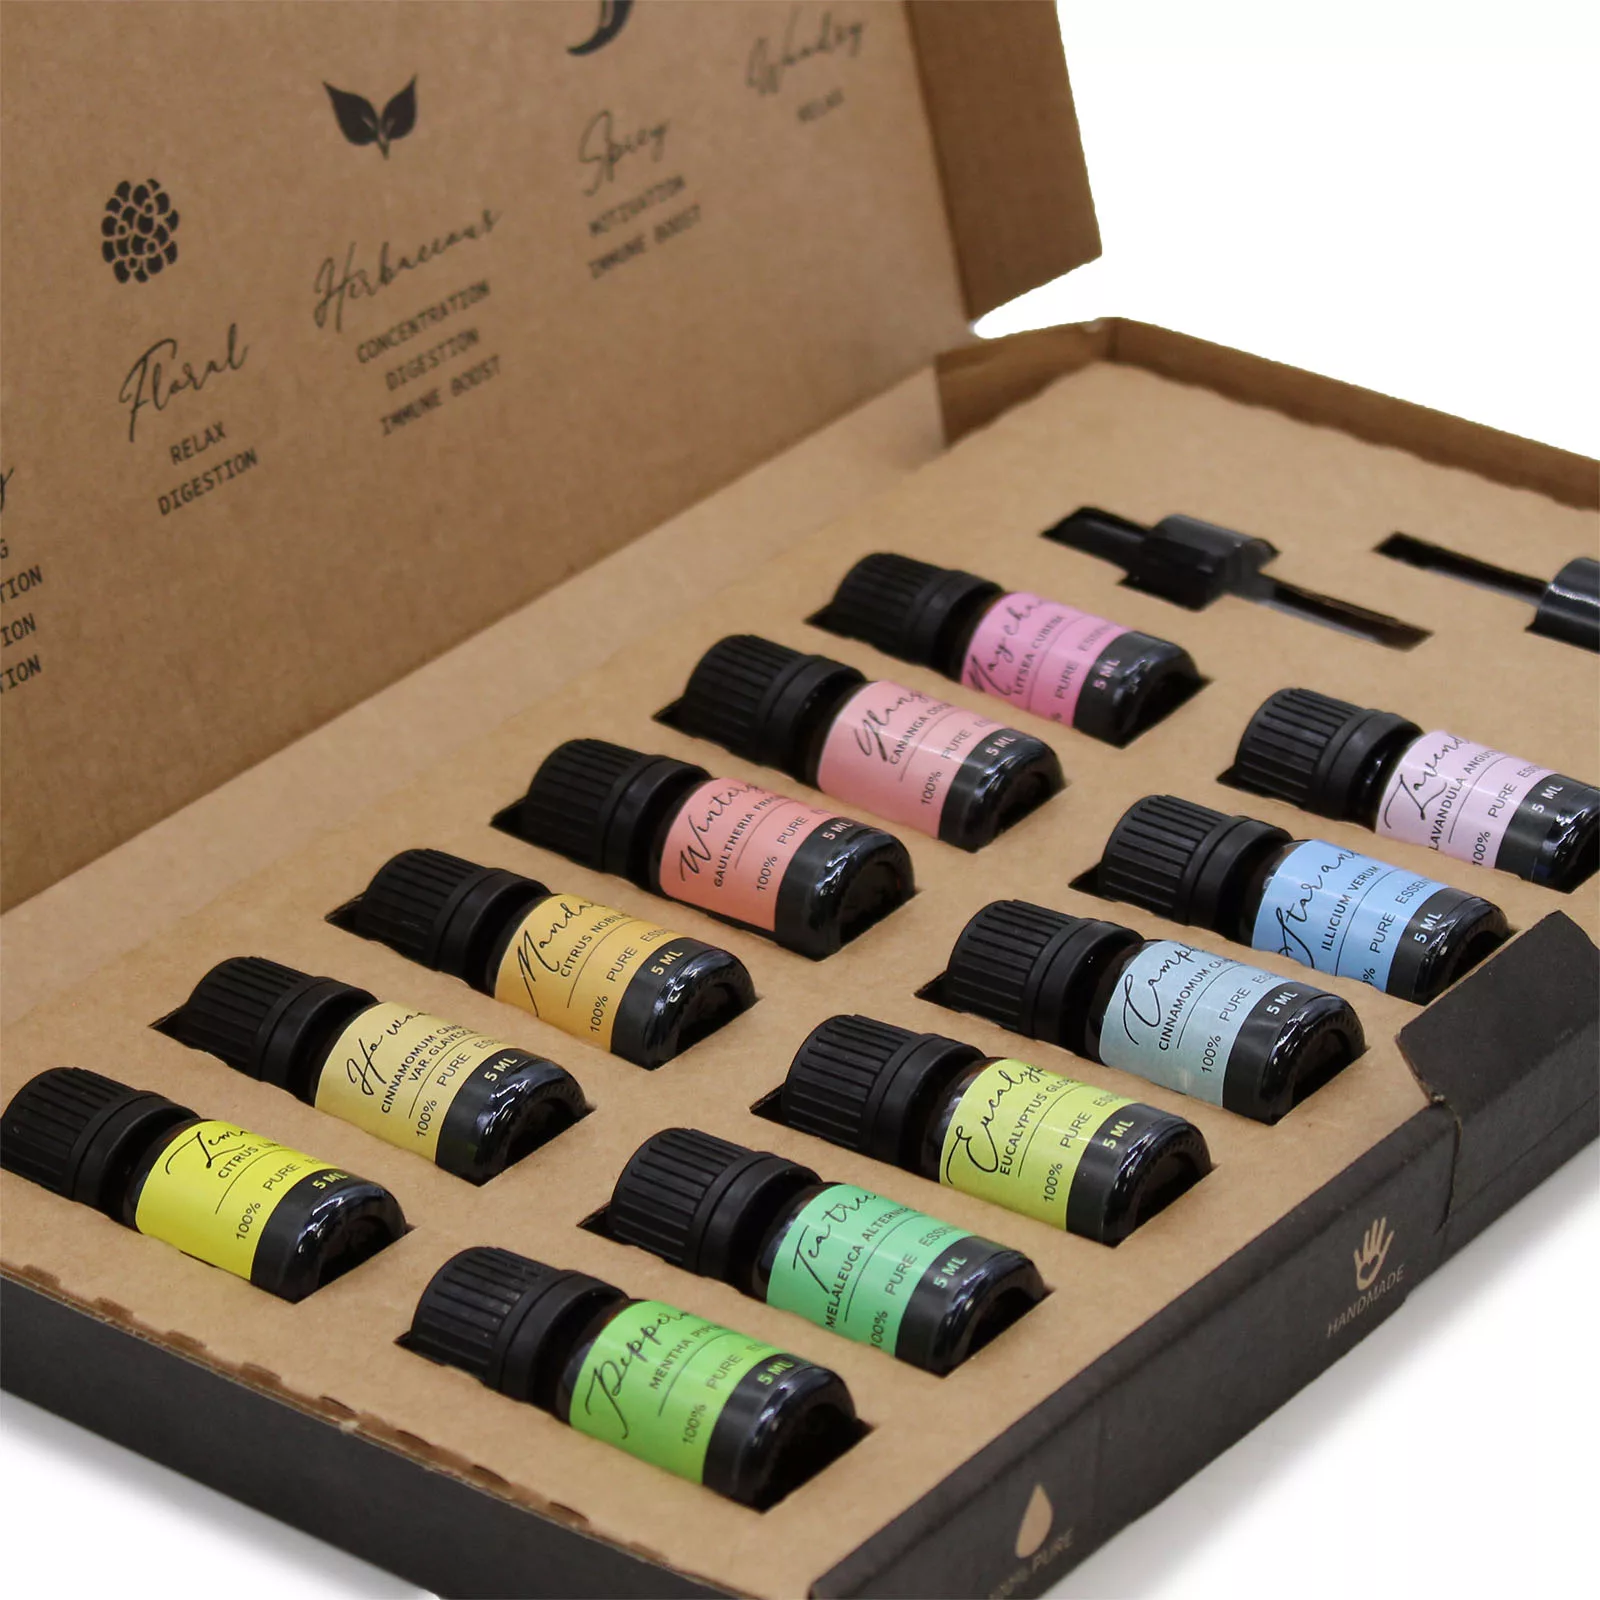 Aromatherapy Essential Oil Set – Starter Pack